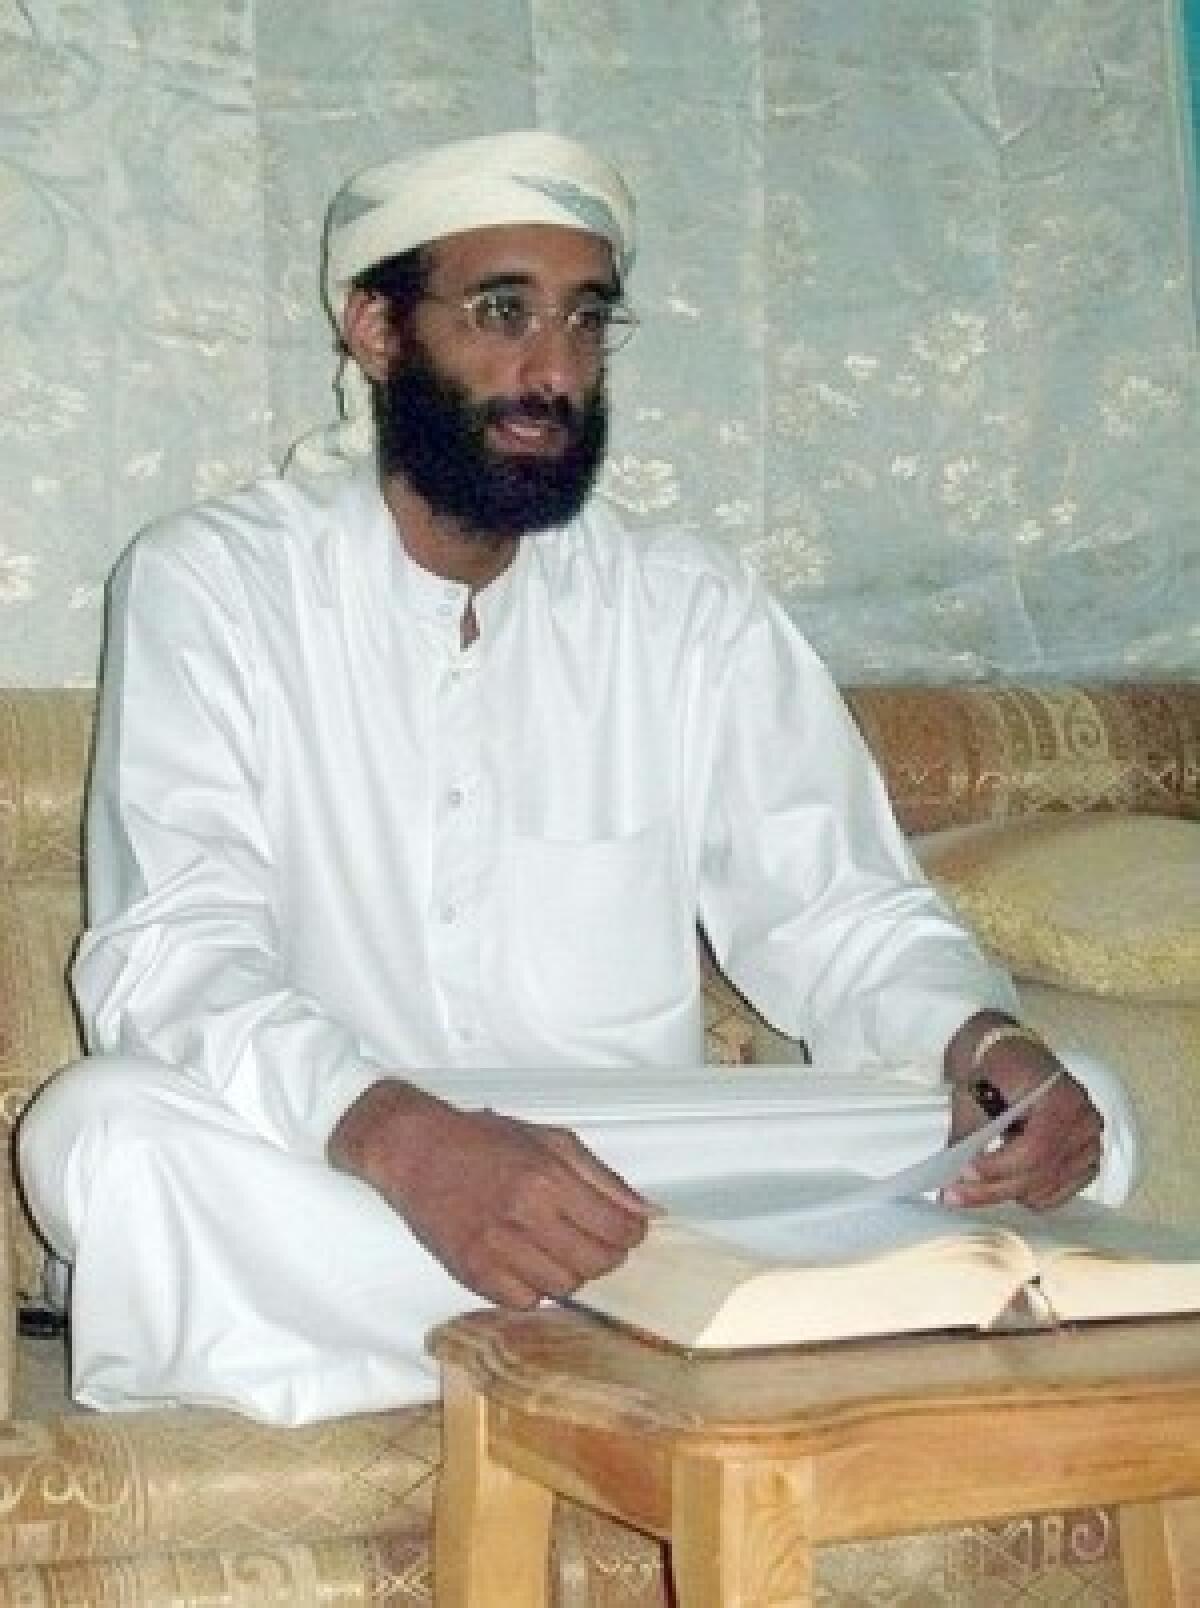 Anwar al Awlaki was an American-born imam whose radical take on Islam was connected to terrorist plots in North America and Europe. He was killed on Sept. 30, 2011, by an American drone attack.